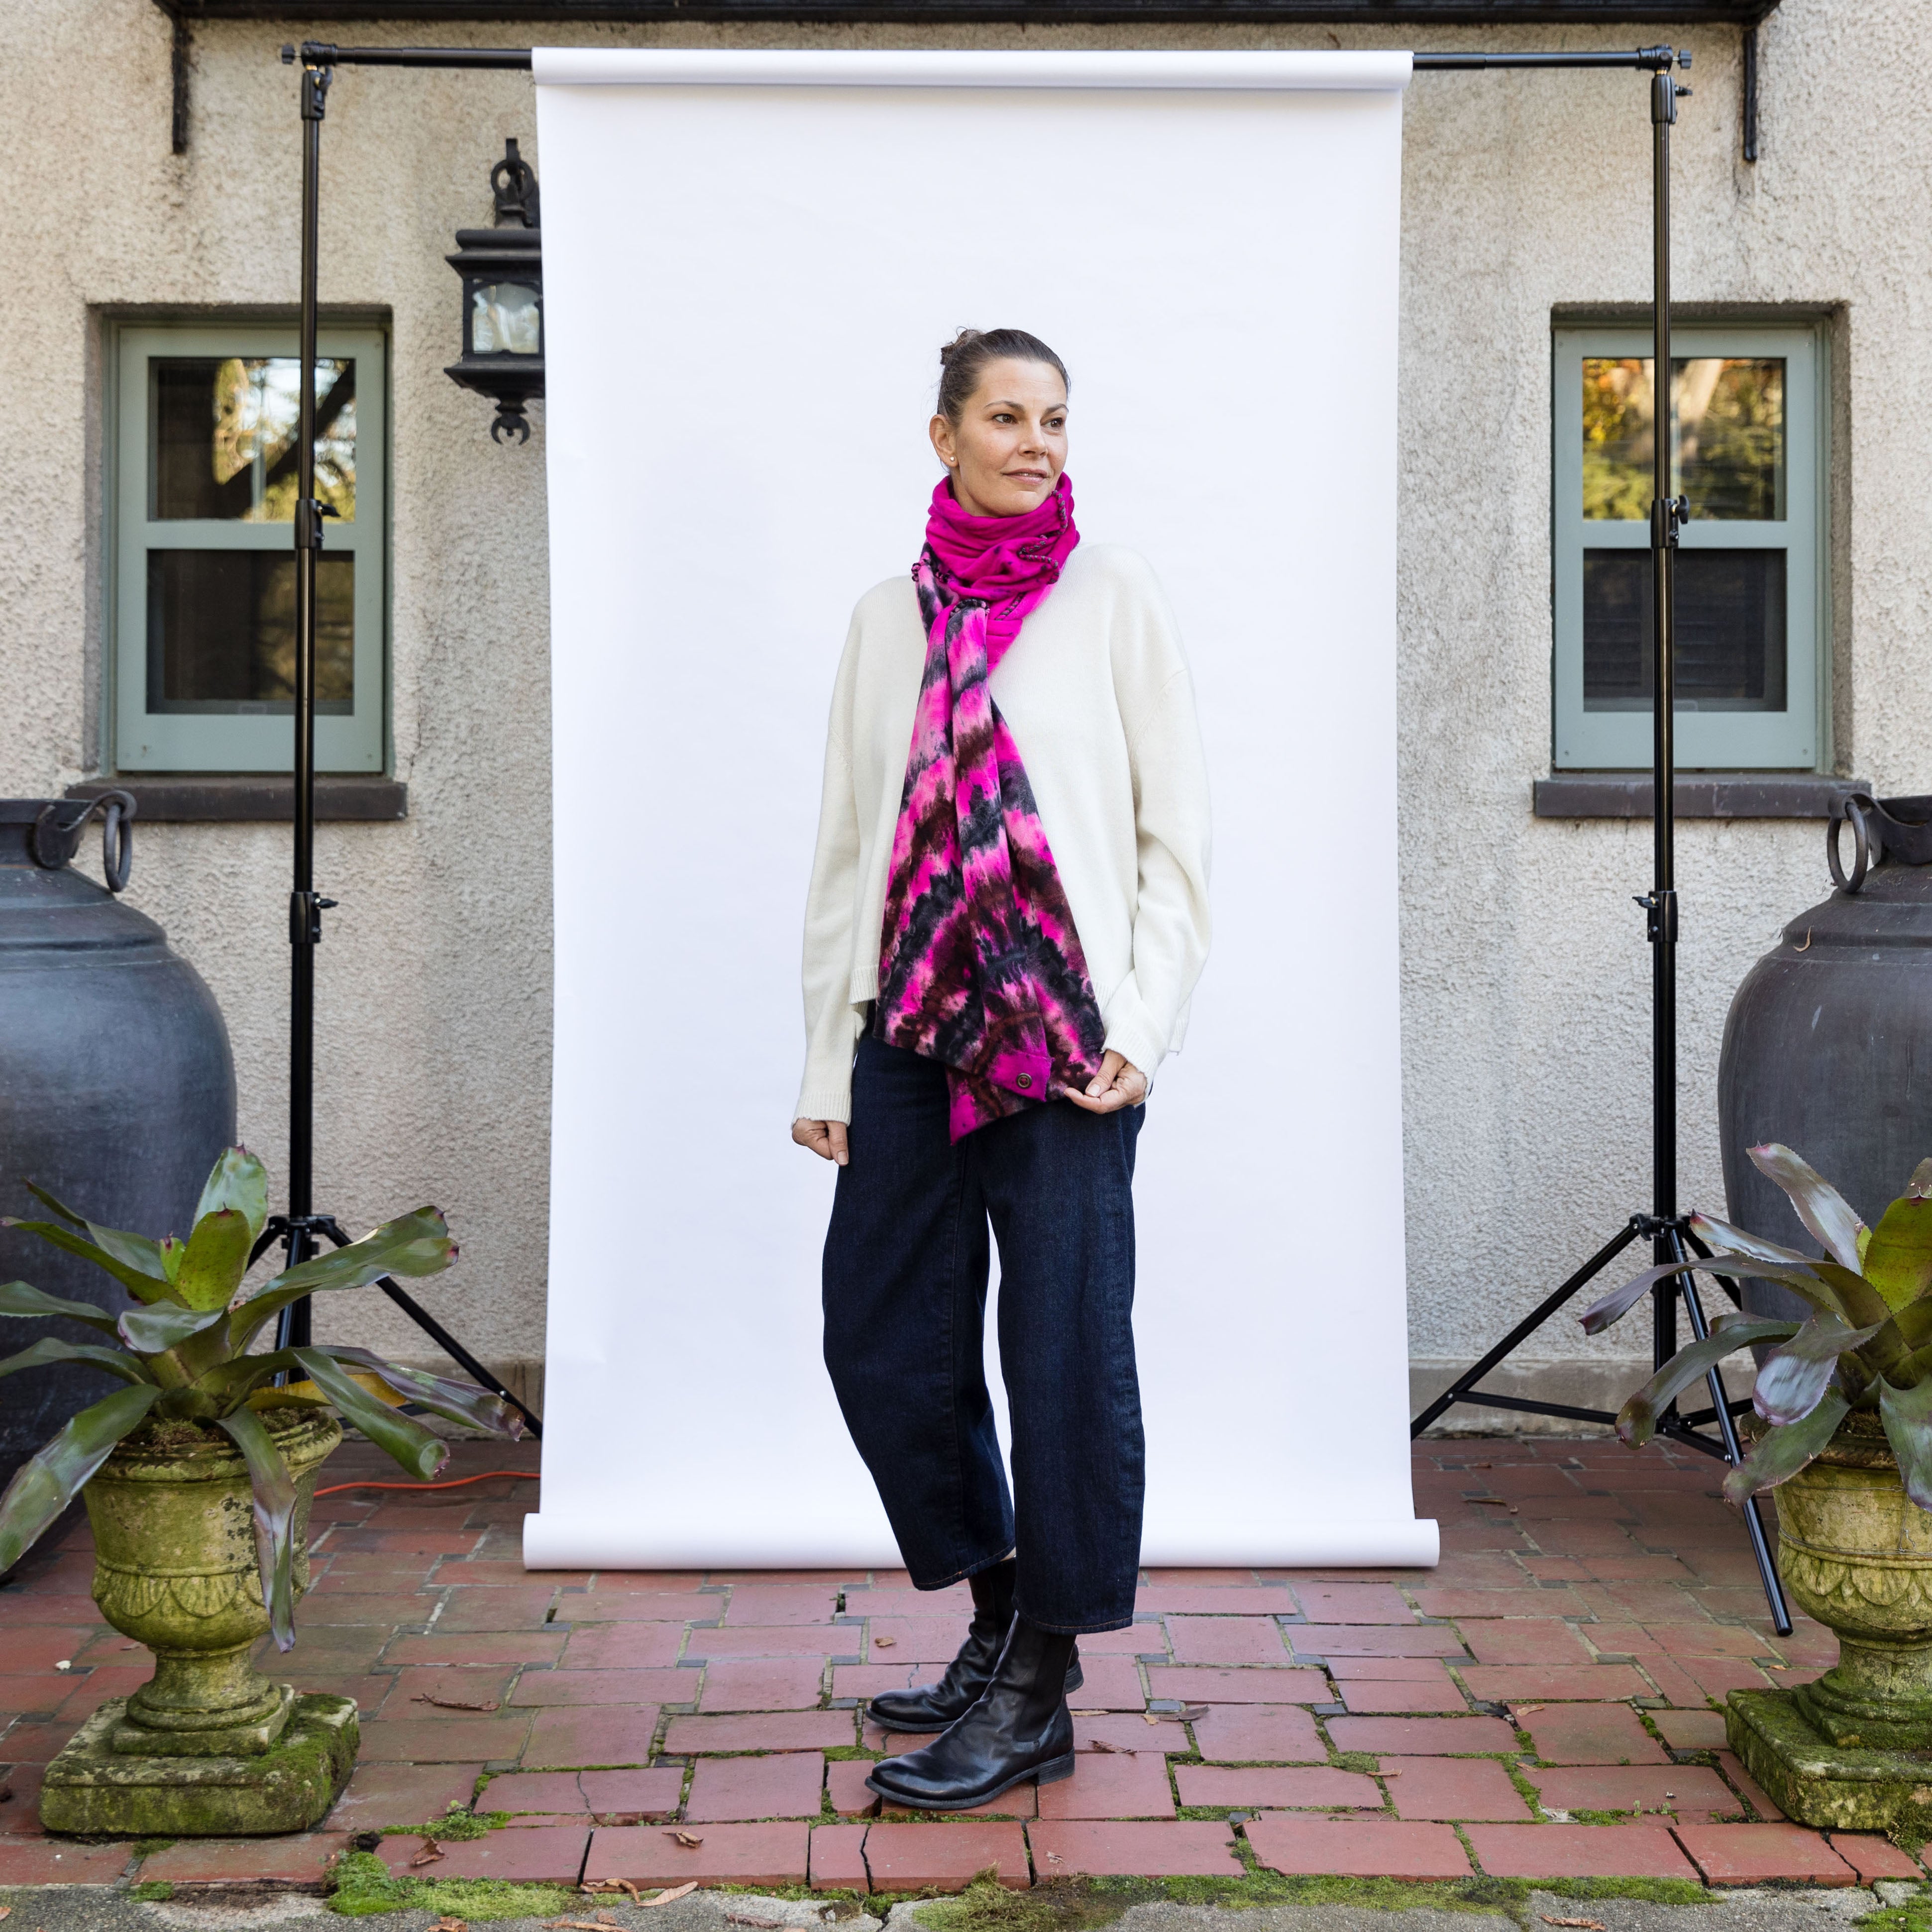 Whipped Coil Threaded Scarf - Hot Pink